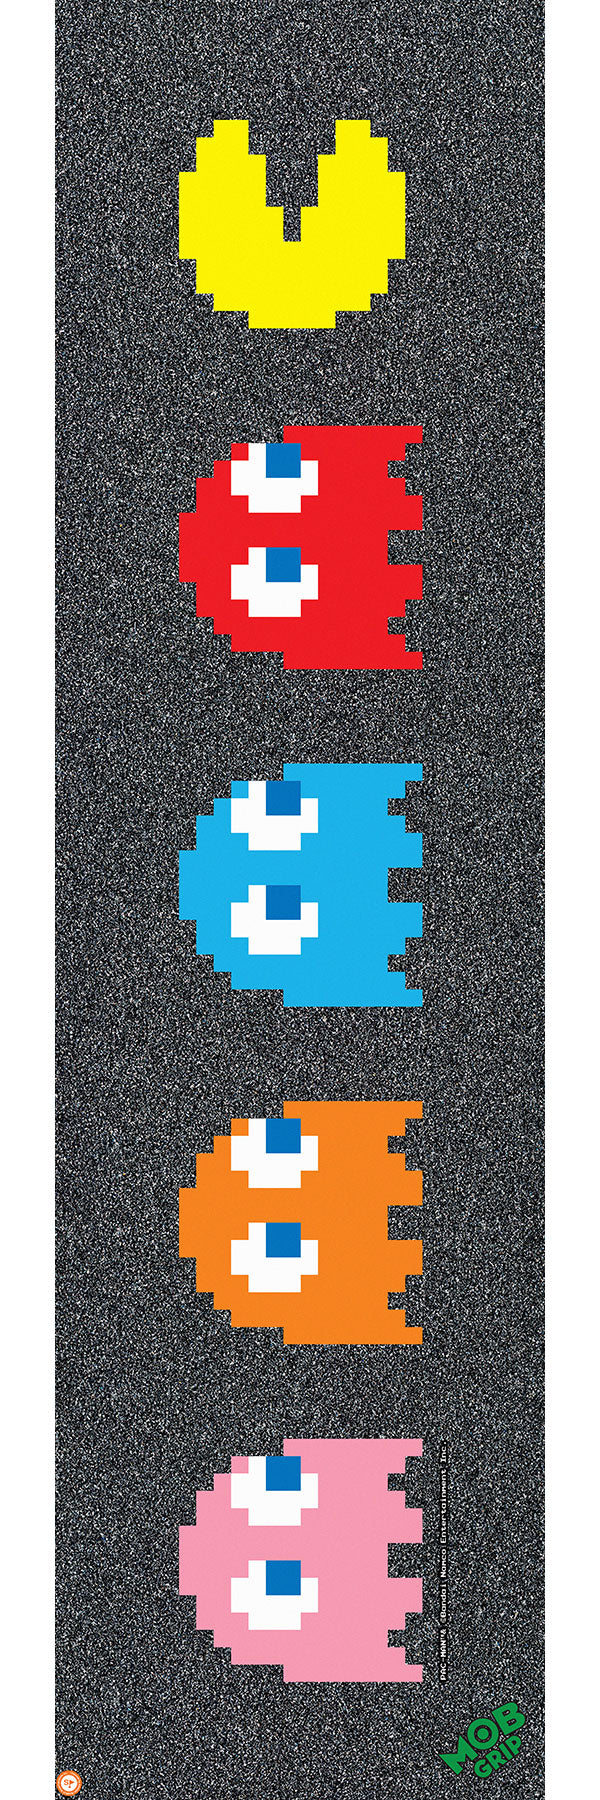 MOB - 9in x 33in PAC-MAN Chase Grip Tape